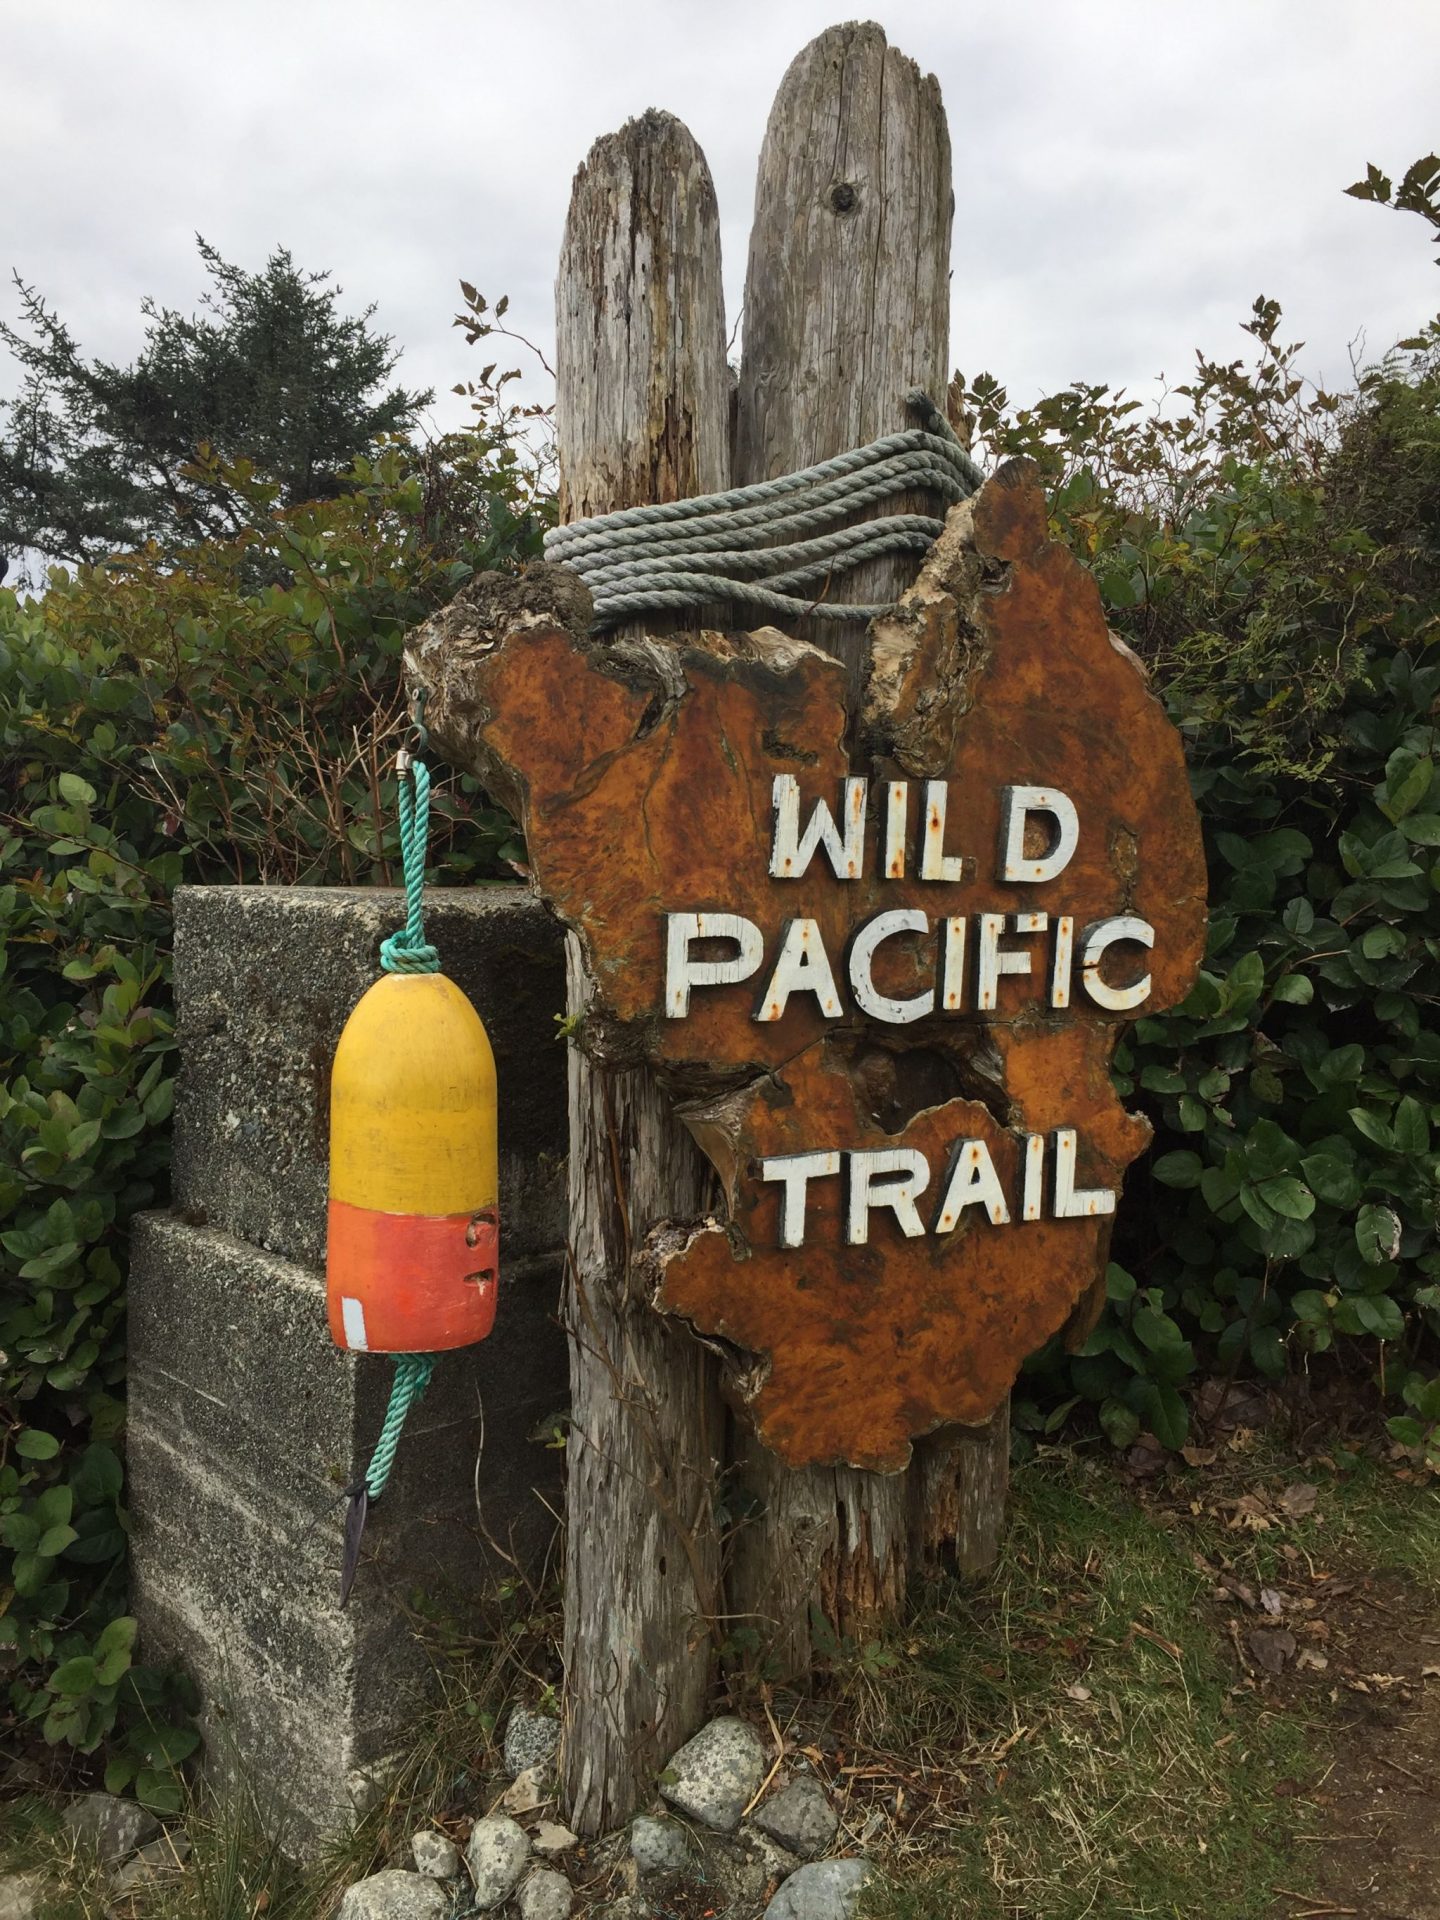 Sign for the Wild Pacific Trail, Ucluelet